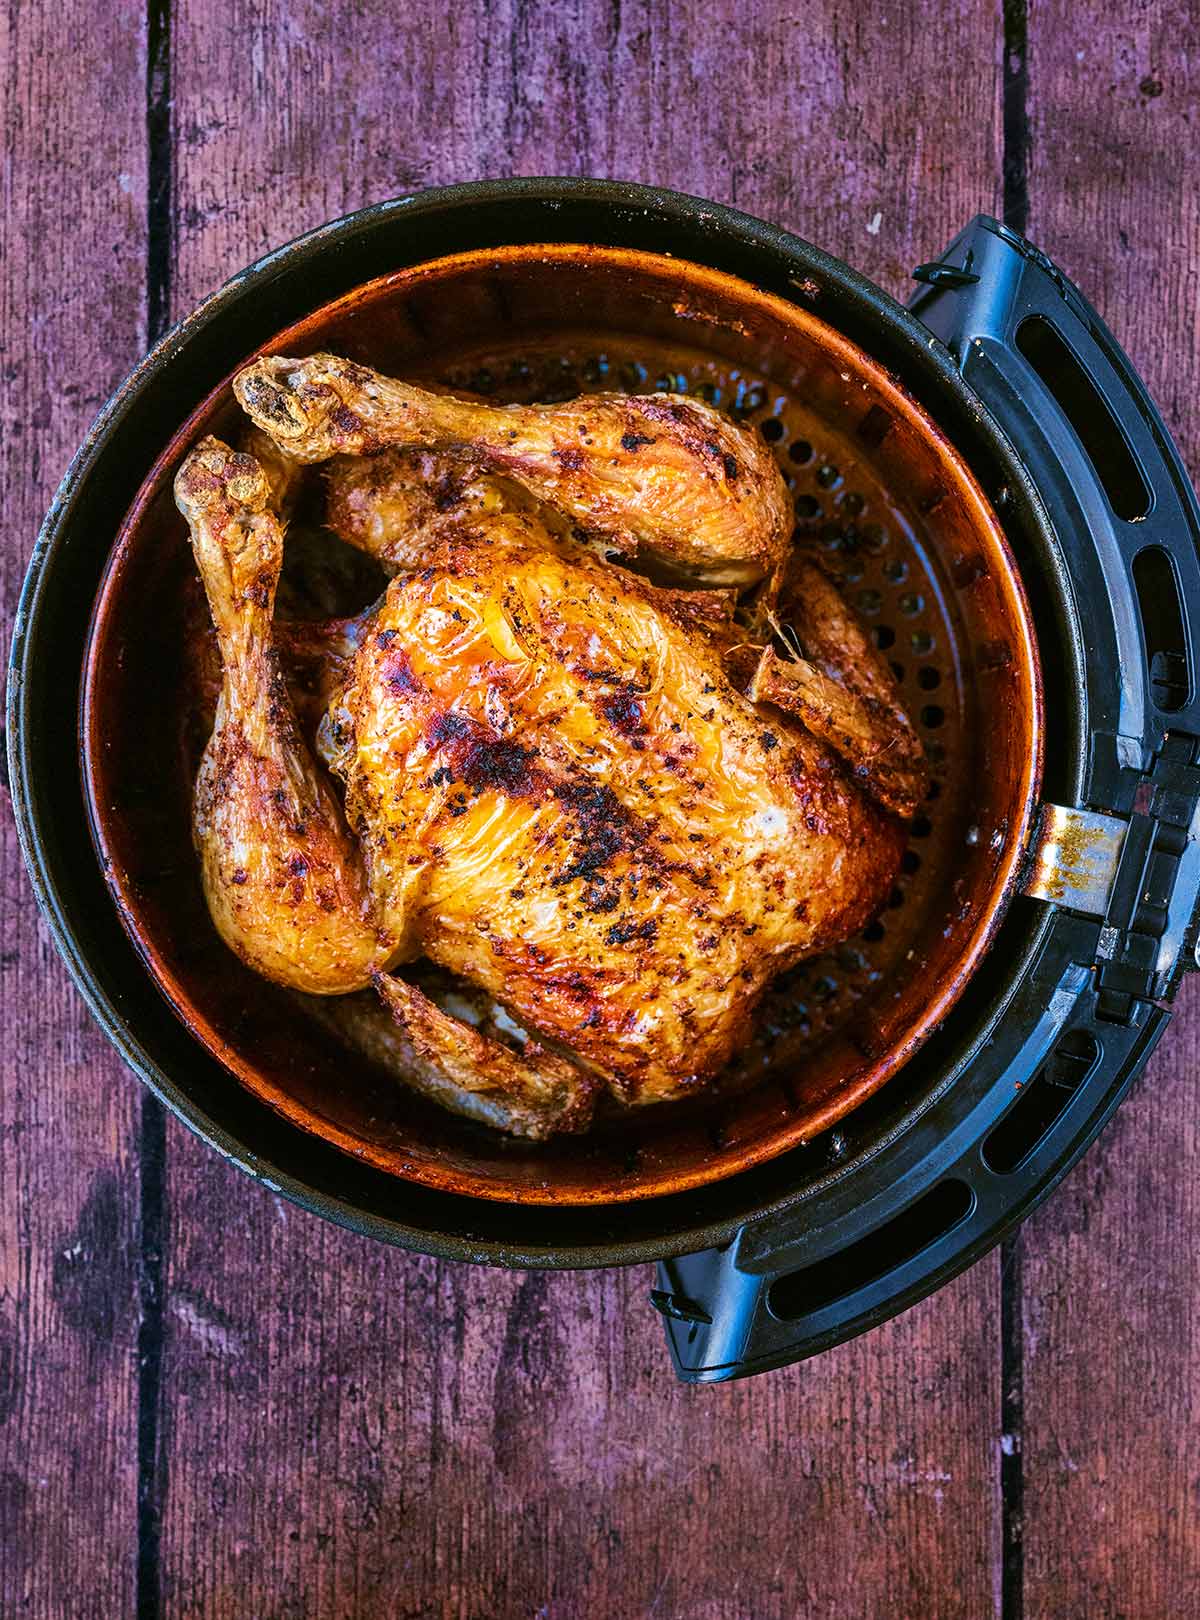 A cooked whole chicken in an air fryer basket.